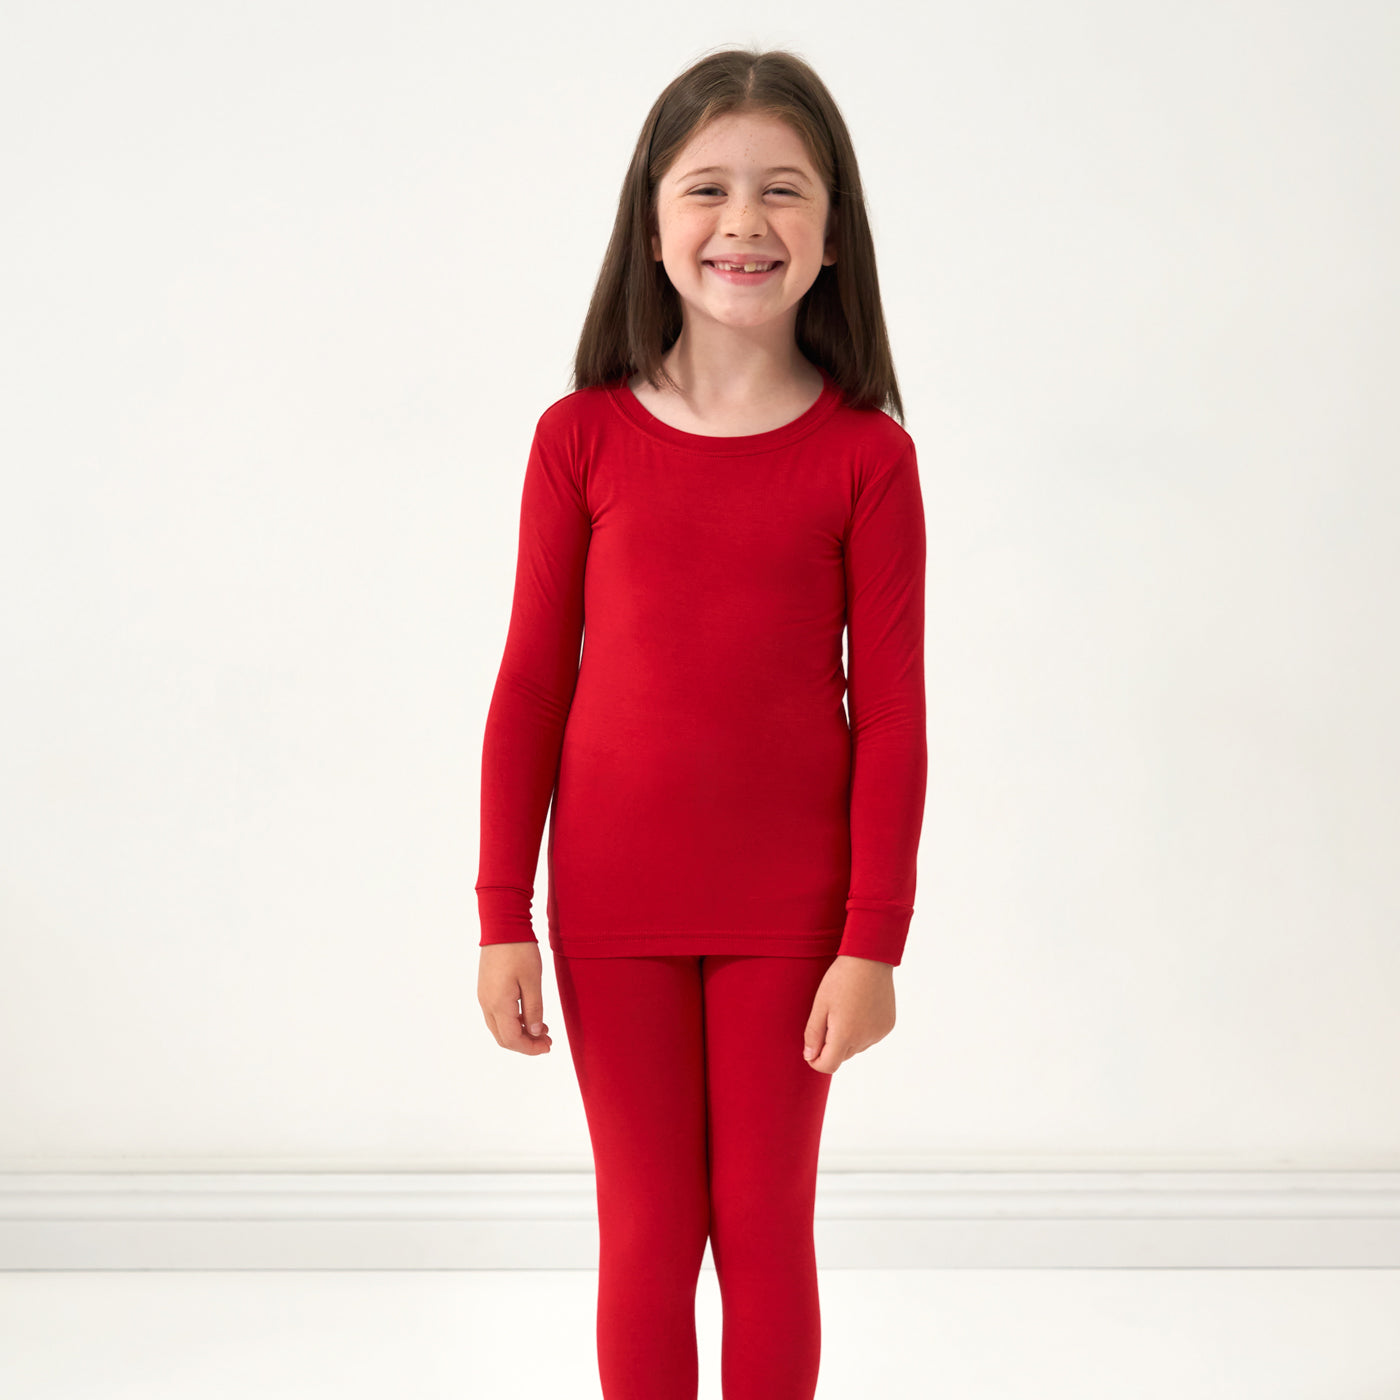 Alternate close up image of a child wearing a Holiday Red two-piece pajama set